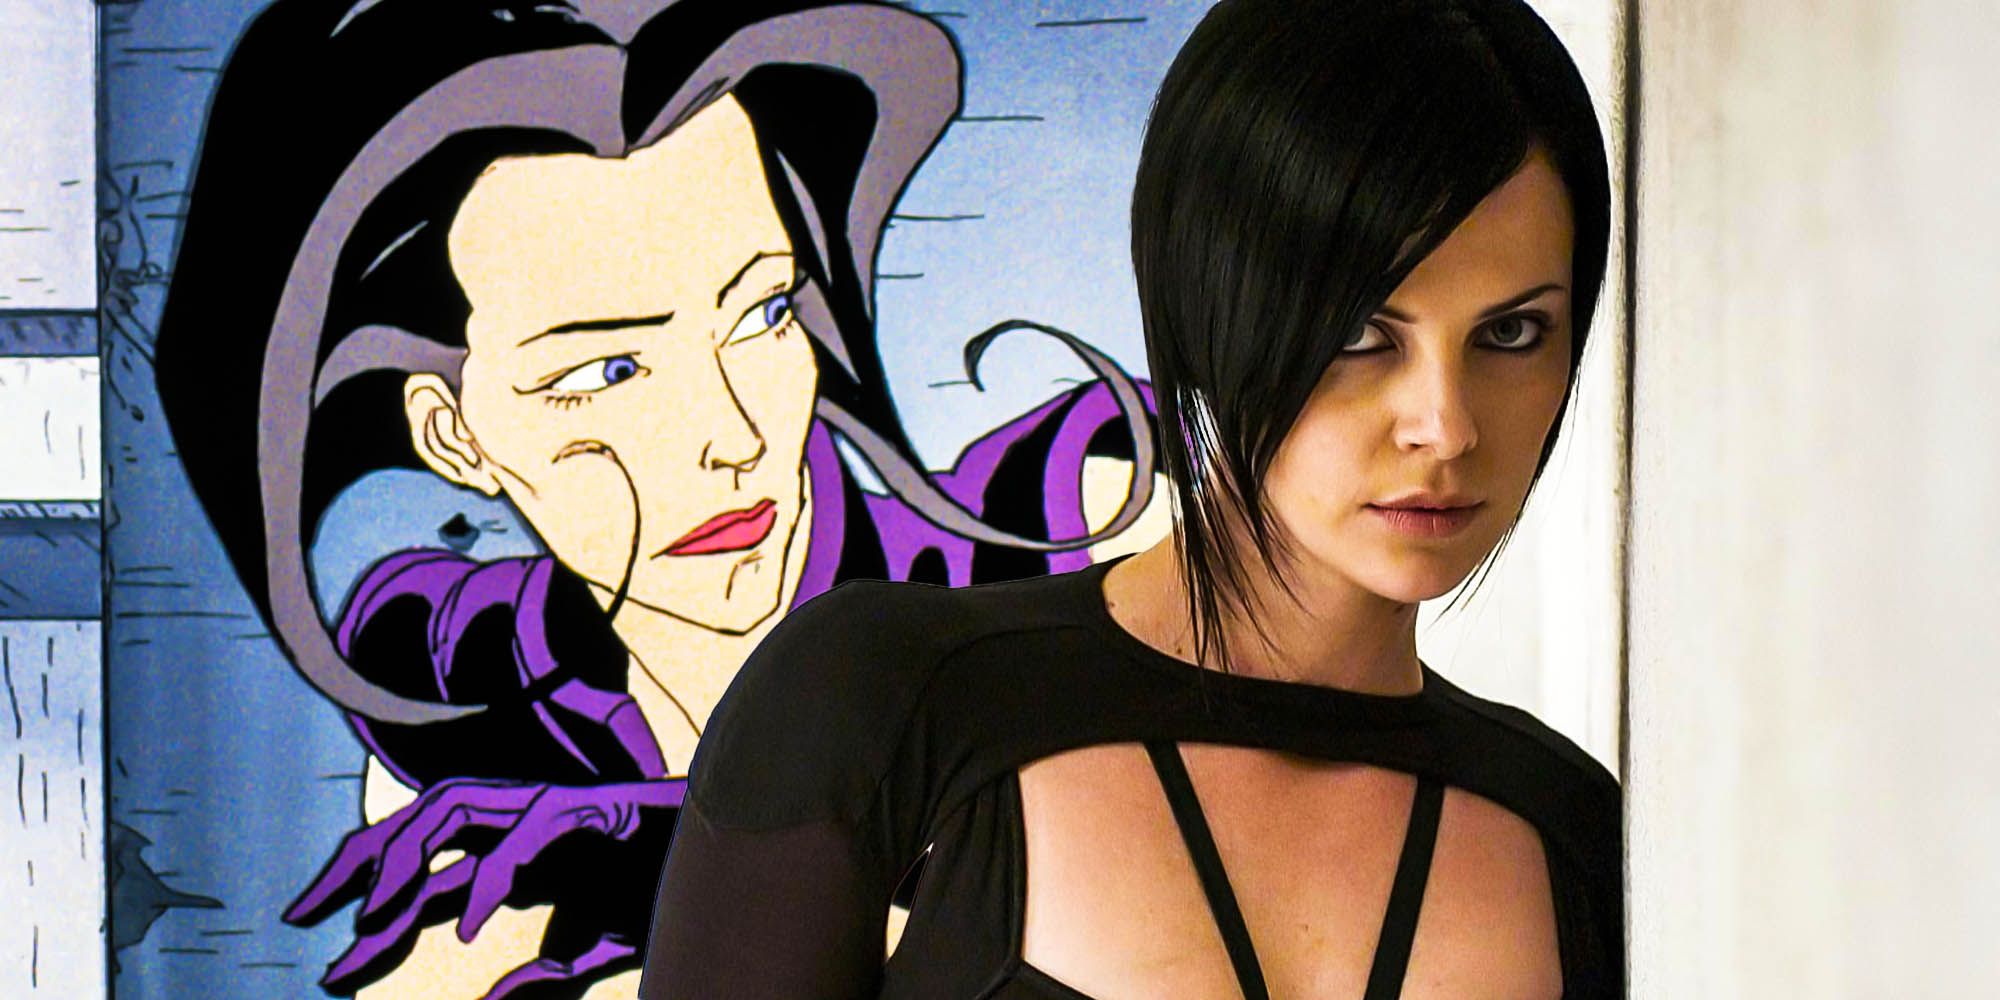 Aeon Flux Animated Show Explored - This 90's Underrated Dark, Mature &  Brave Cartoon Is A Rare Gem! - YouTube